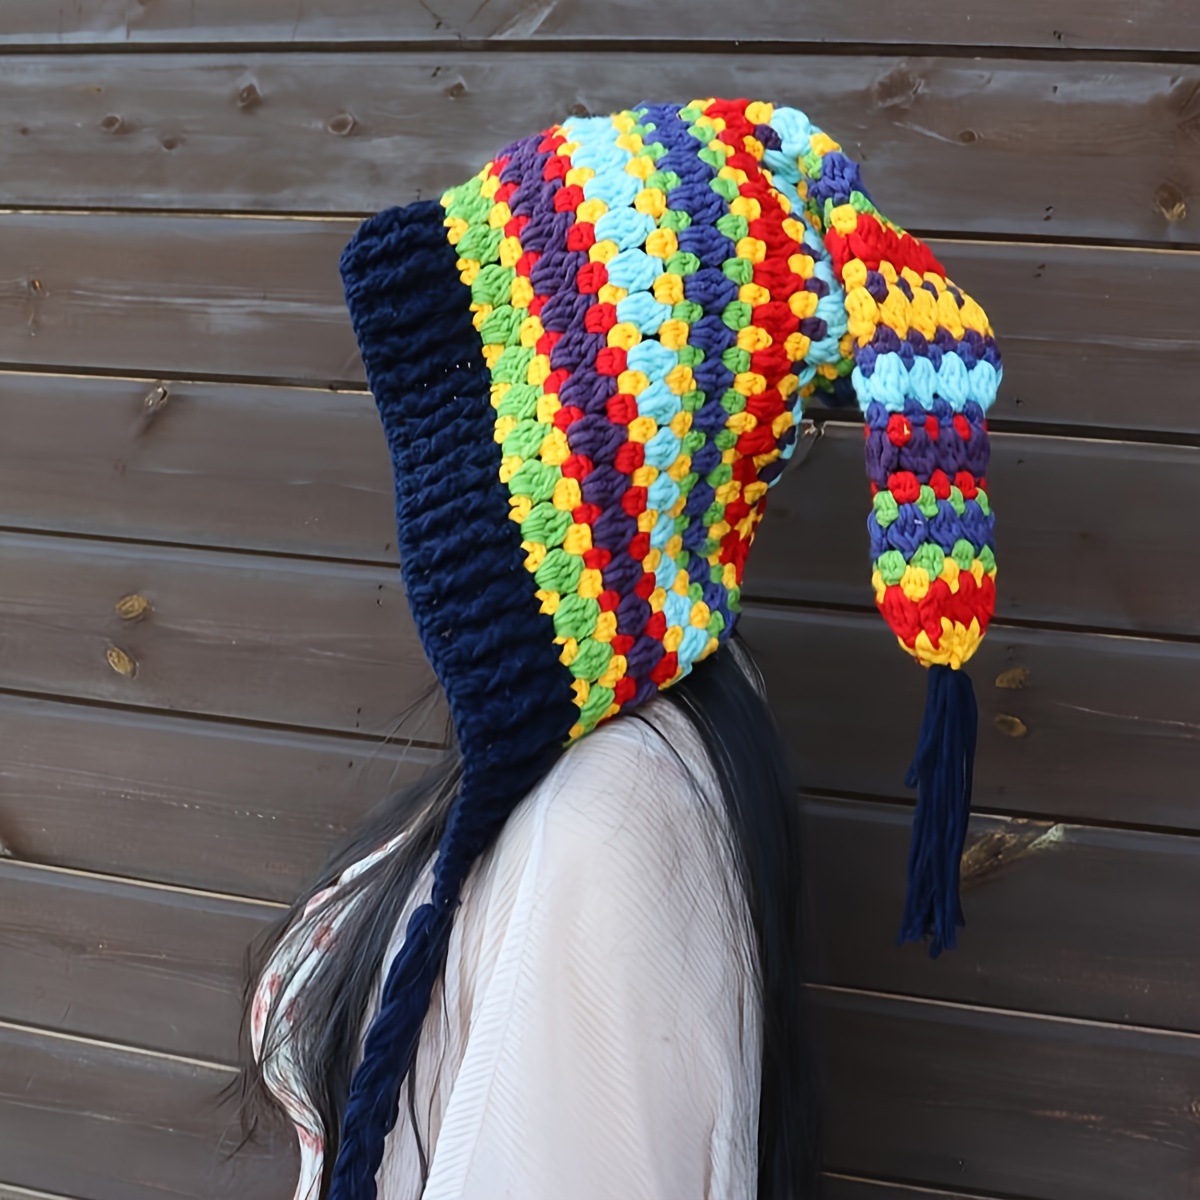 

Boho Candy Color Crochet Beanie Vintage Striped Color Block Rainbow Knit Hats Large Ear Flap Hat Tassel Beanies For Women Daily Uses